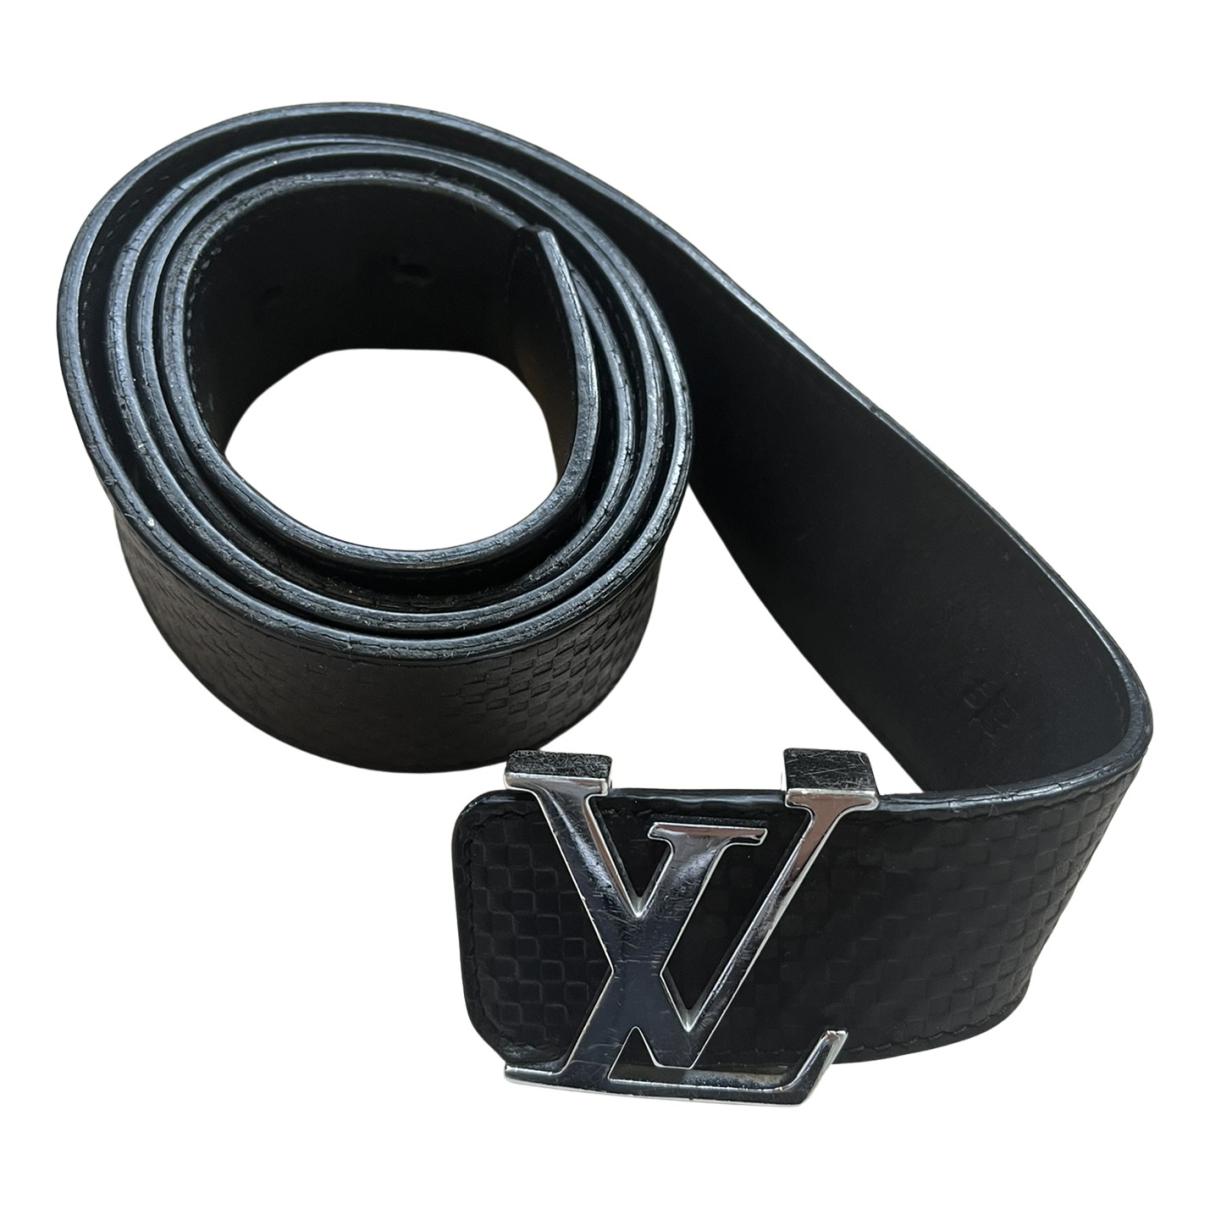 Louis Vuitton Mens Belts, Black, 100cm (Stock Confirmation Required)